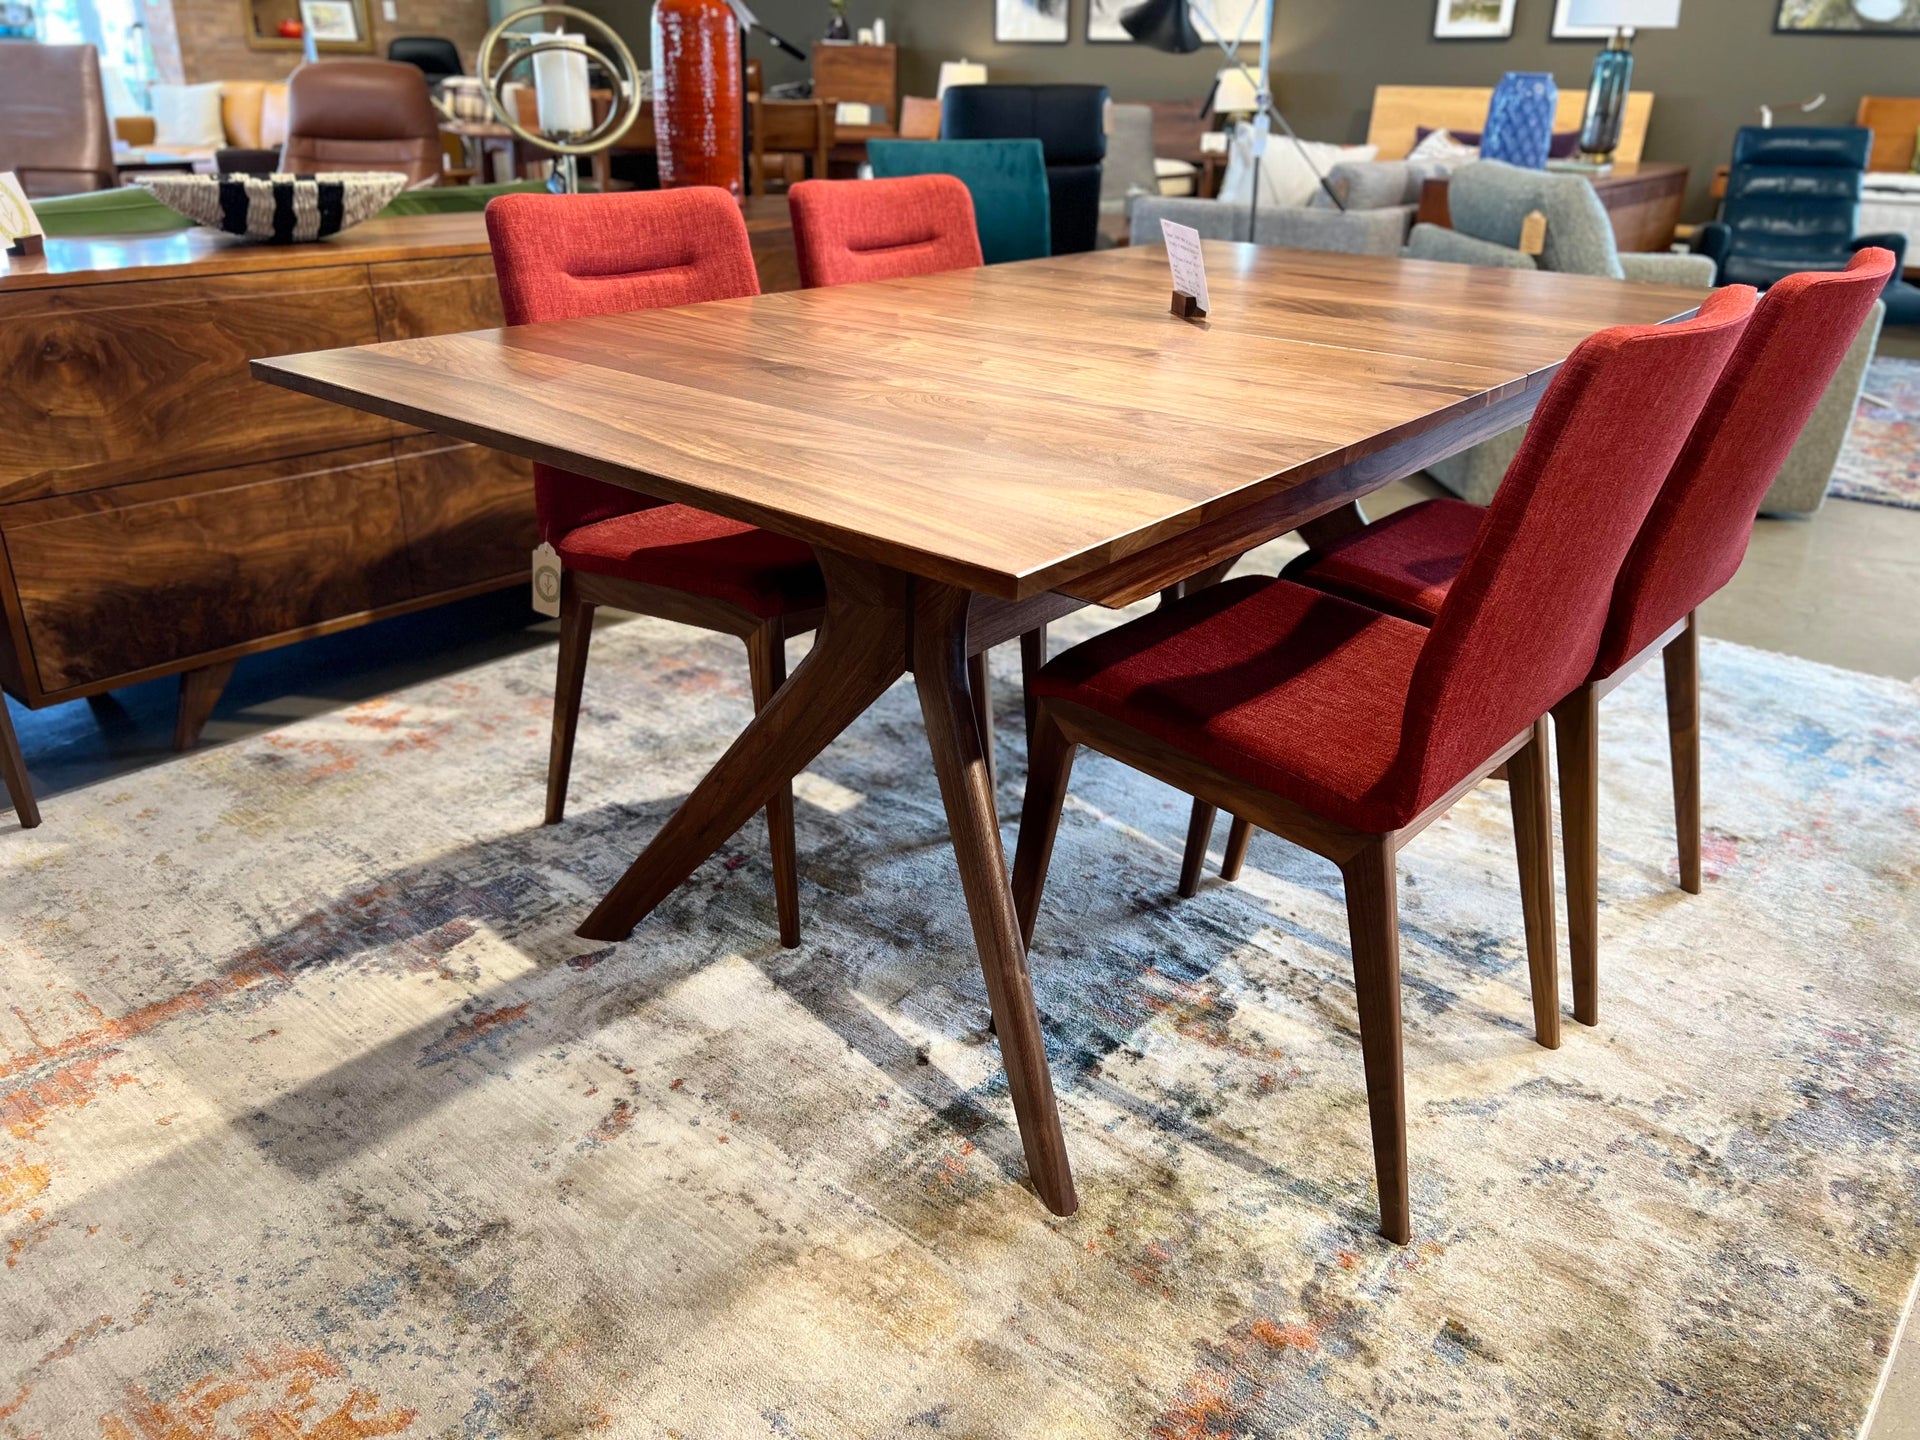 Strata Extendable Dining Table - Solid Wood Extension Dining Table